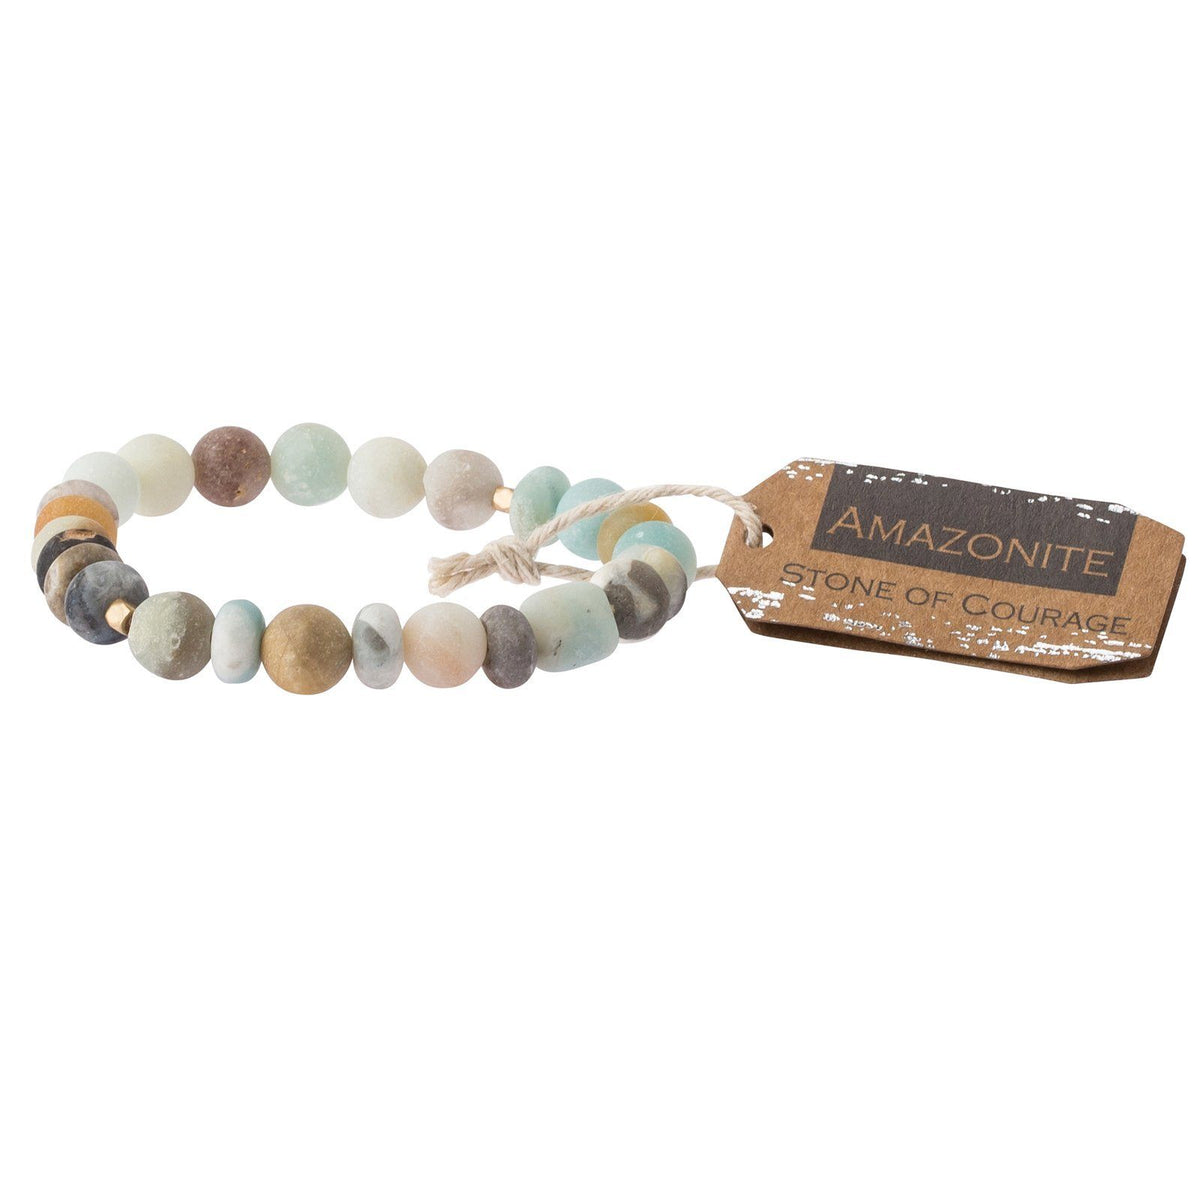 Scout Curated Wears Amazonite Stone Bracelet - Stone of Courage (1733258412075)